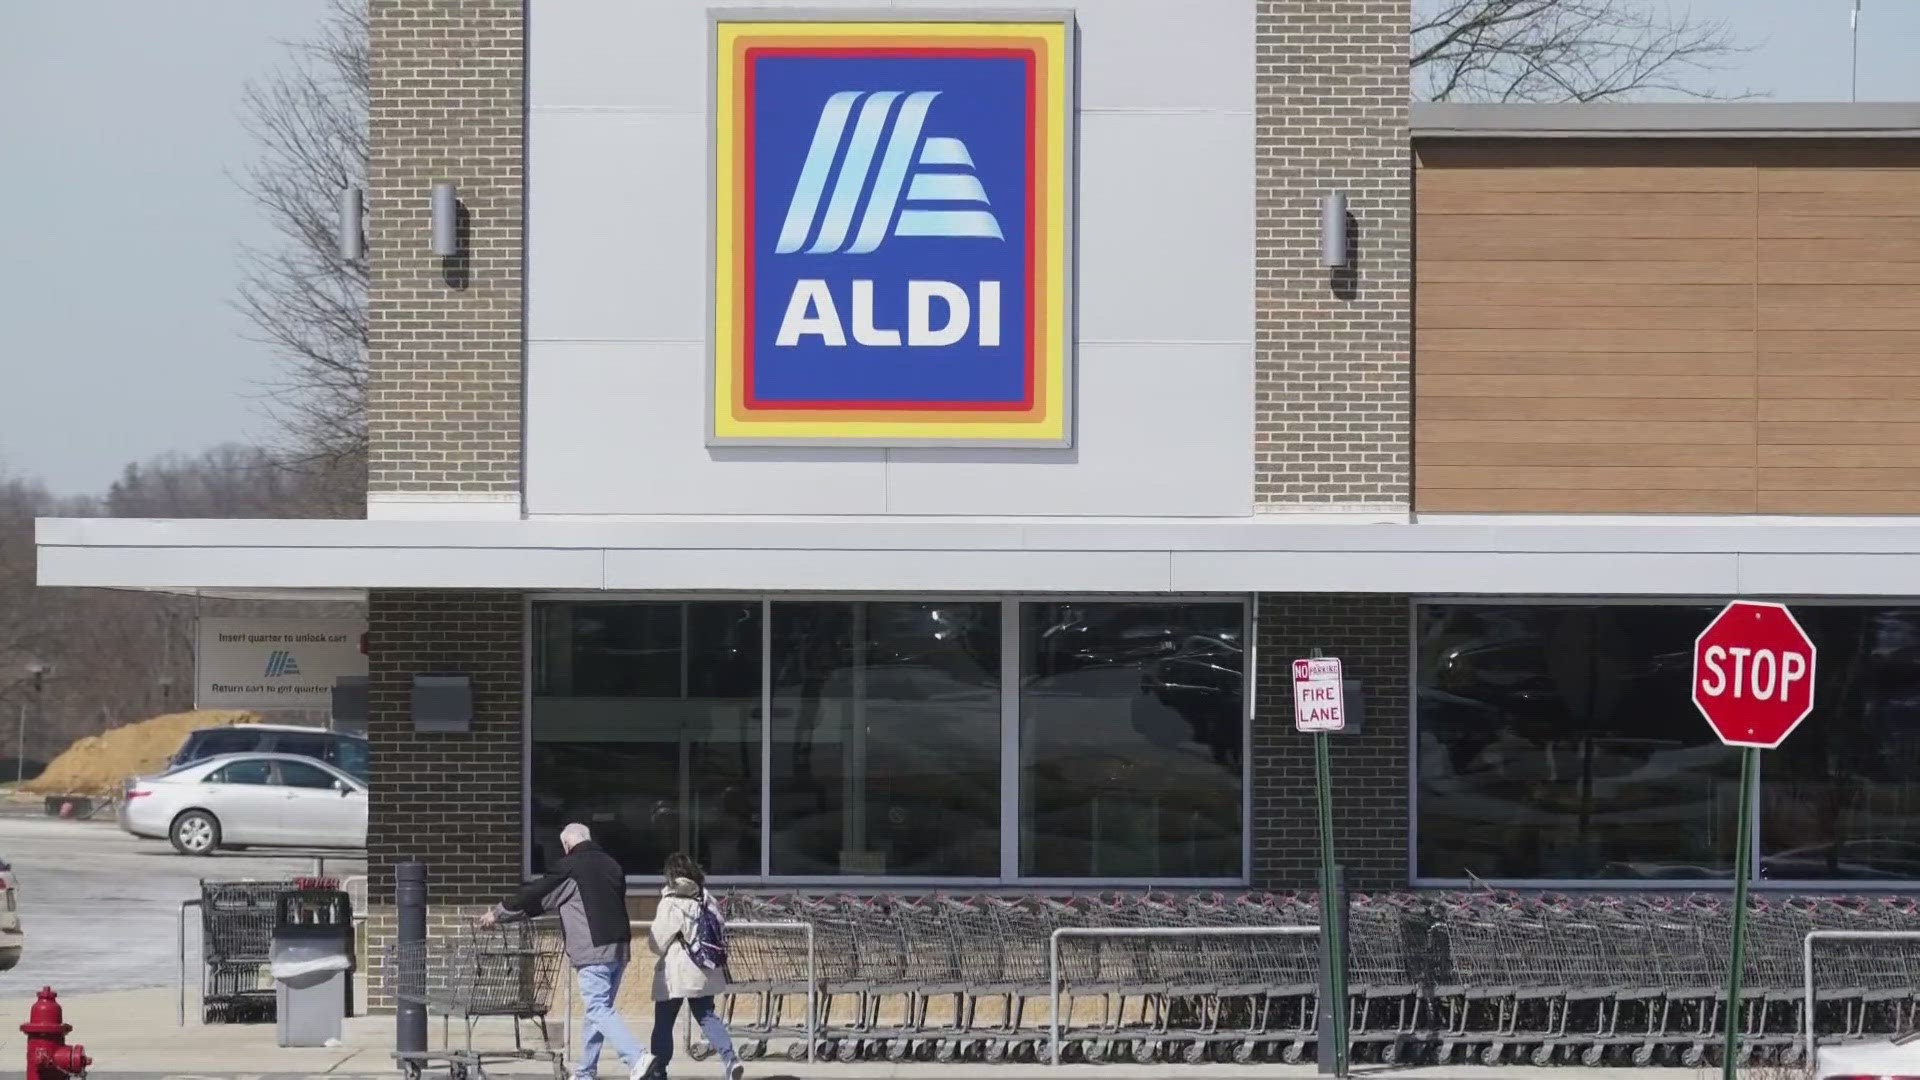 If the merger is approved, some locations will be converted to Aldi stores.